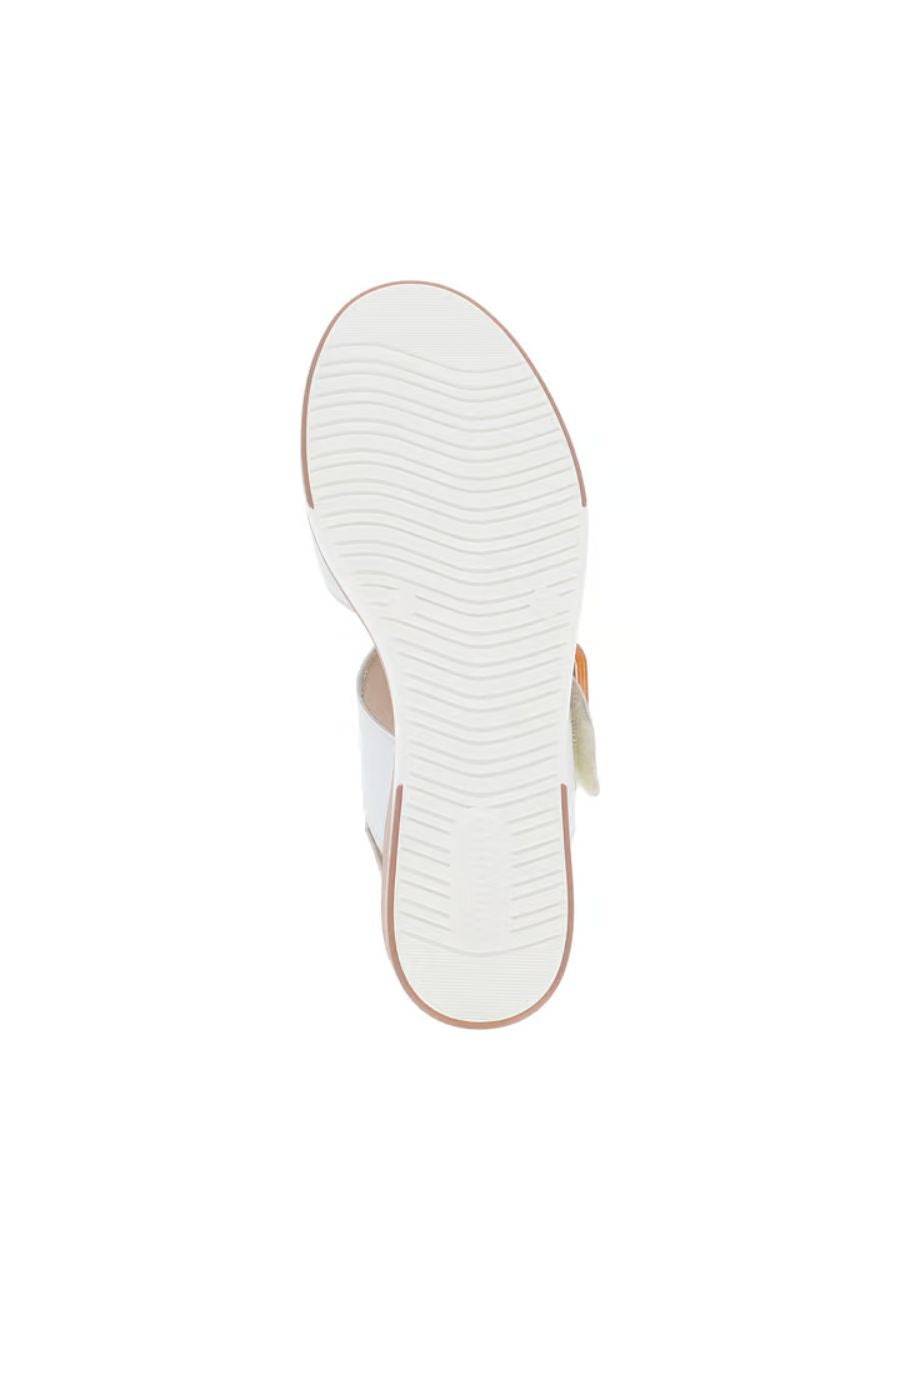 Remonte Wedge Sandal in White